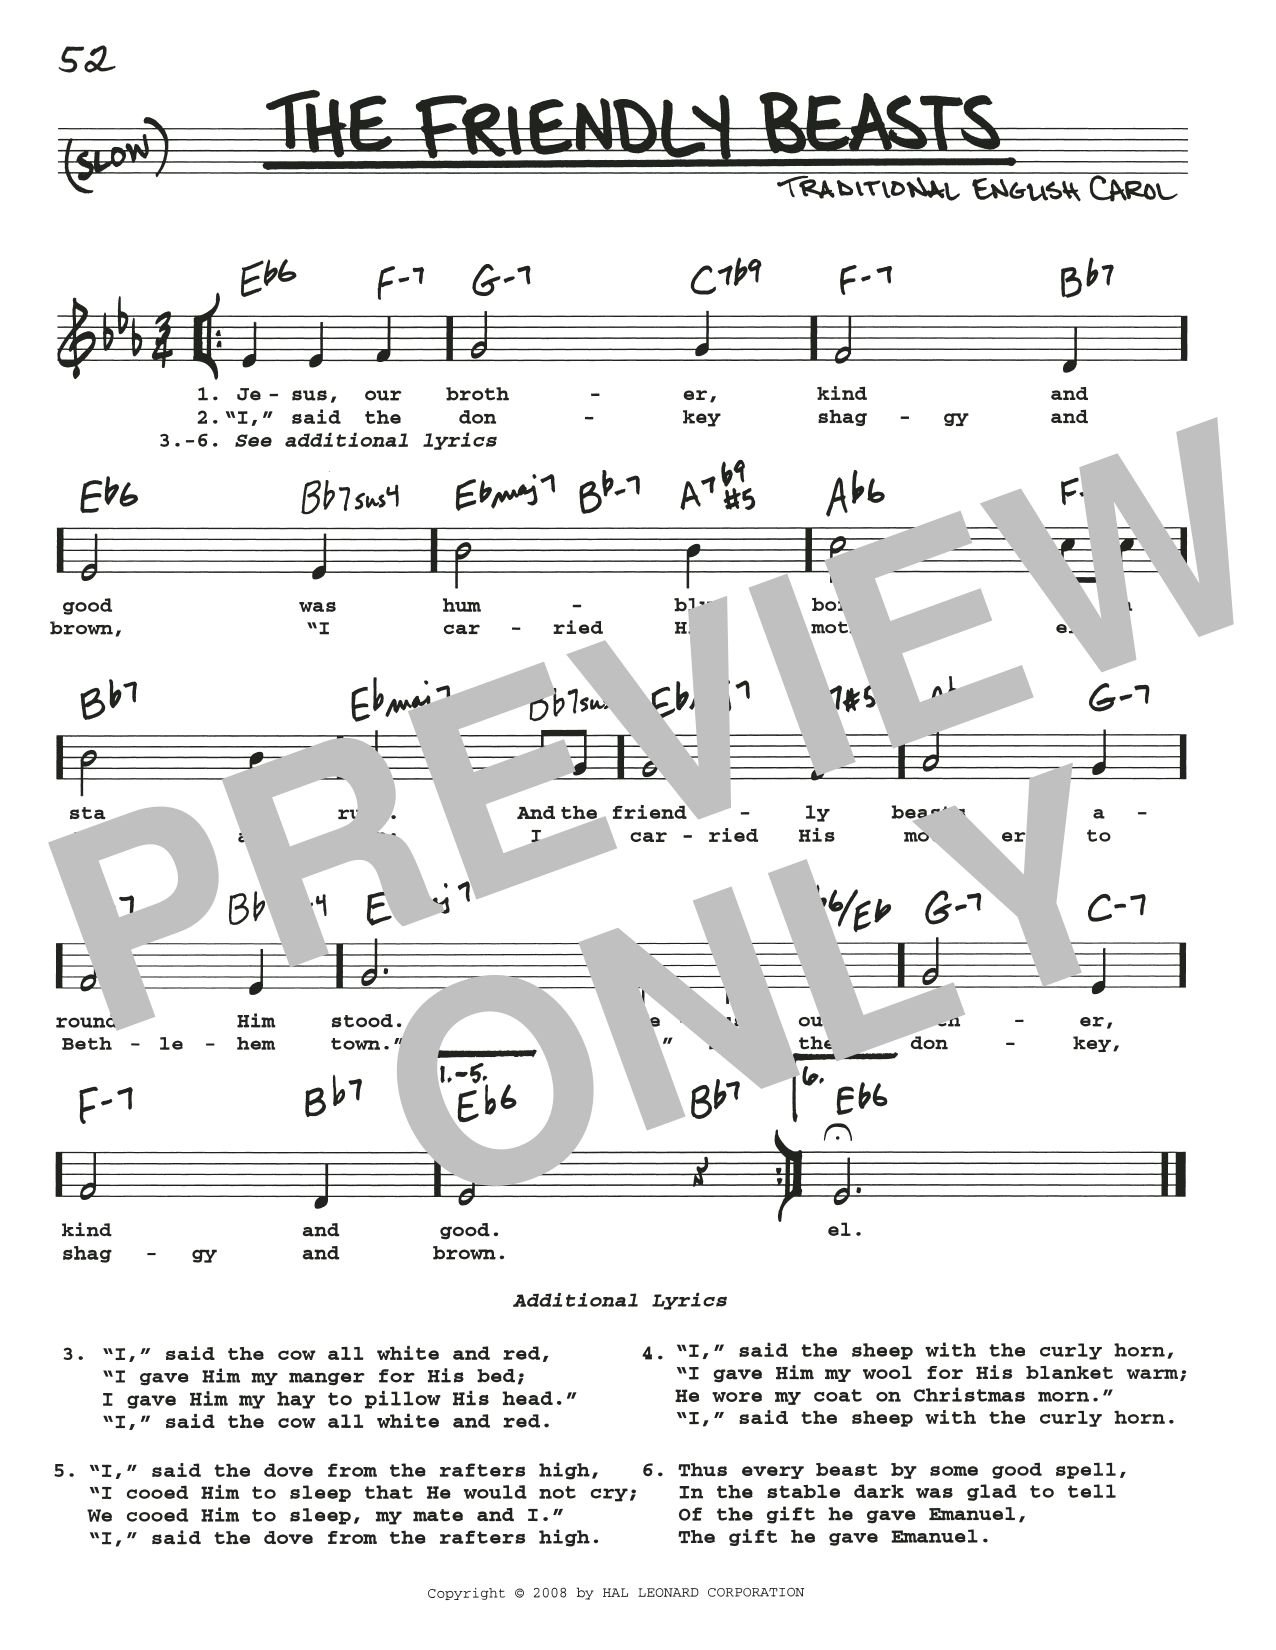 Download Traditional English Carol The Friendly Beasts Sheet Music